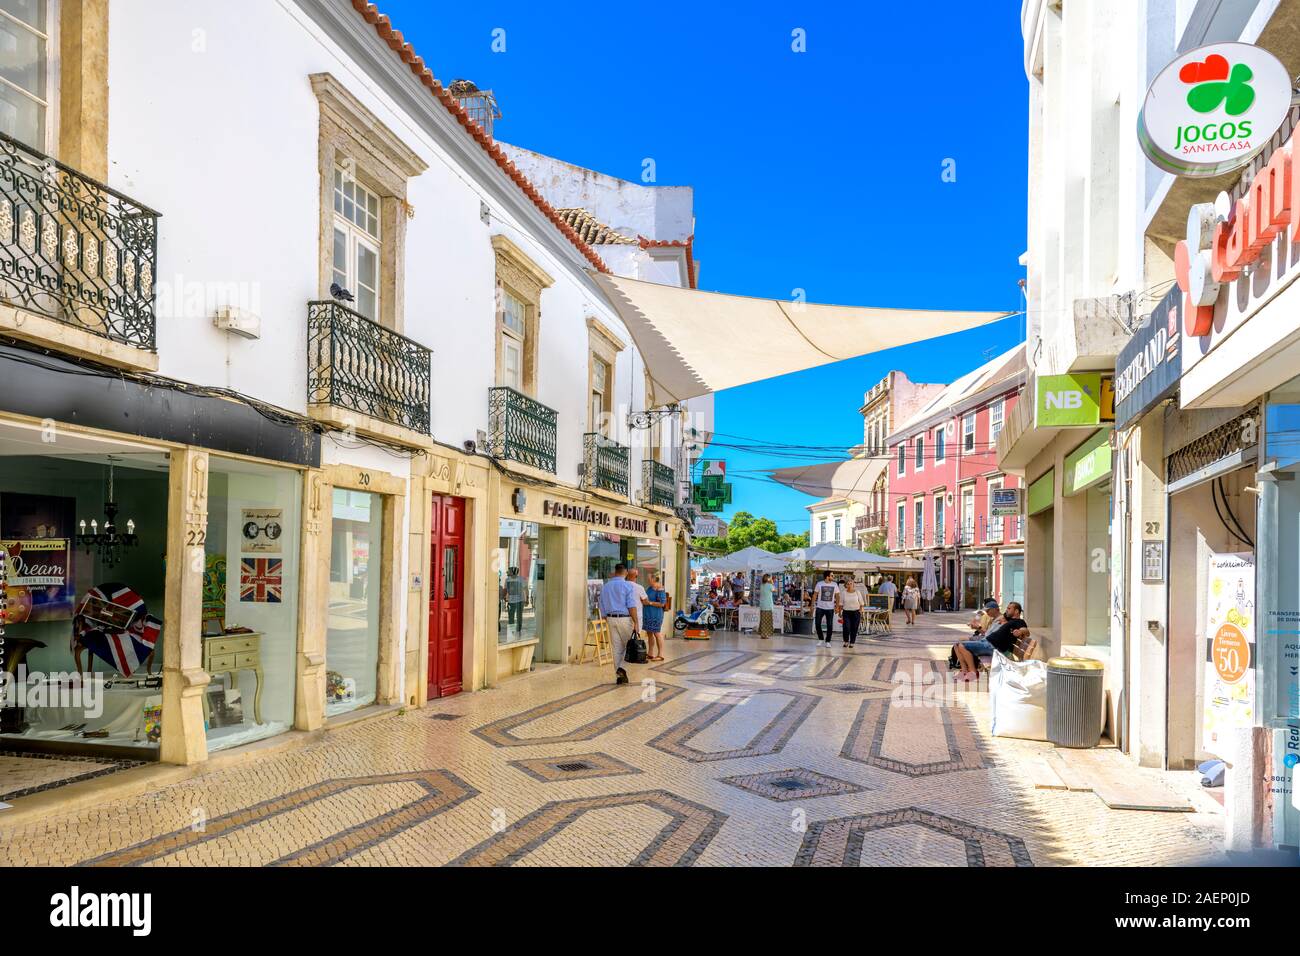 Faro shops and Outdoor restaurant in traditionally paved street with traditional Portuguese cobbles, Calcada shopping centre Faro, Algarve Portugal. Stock Photo